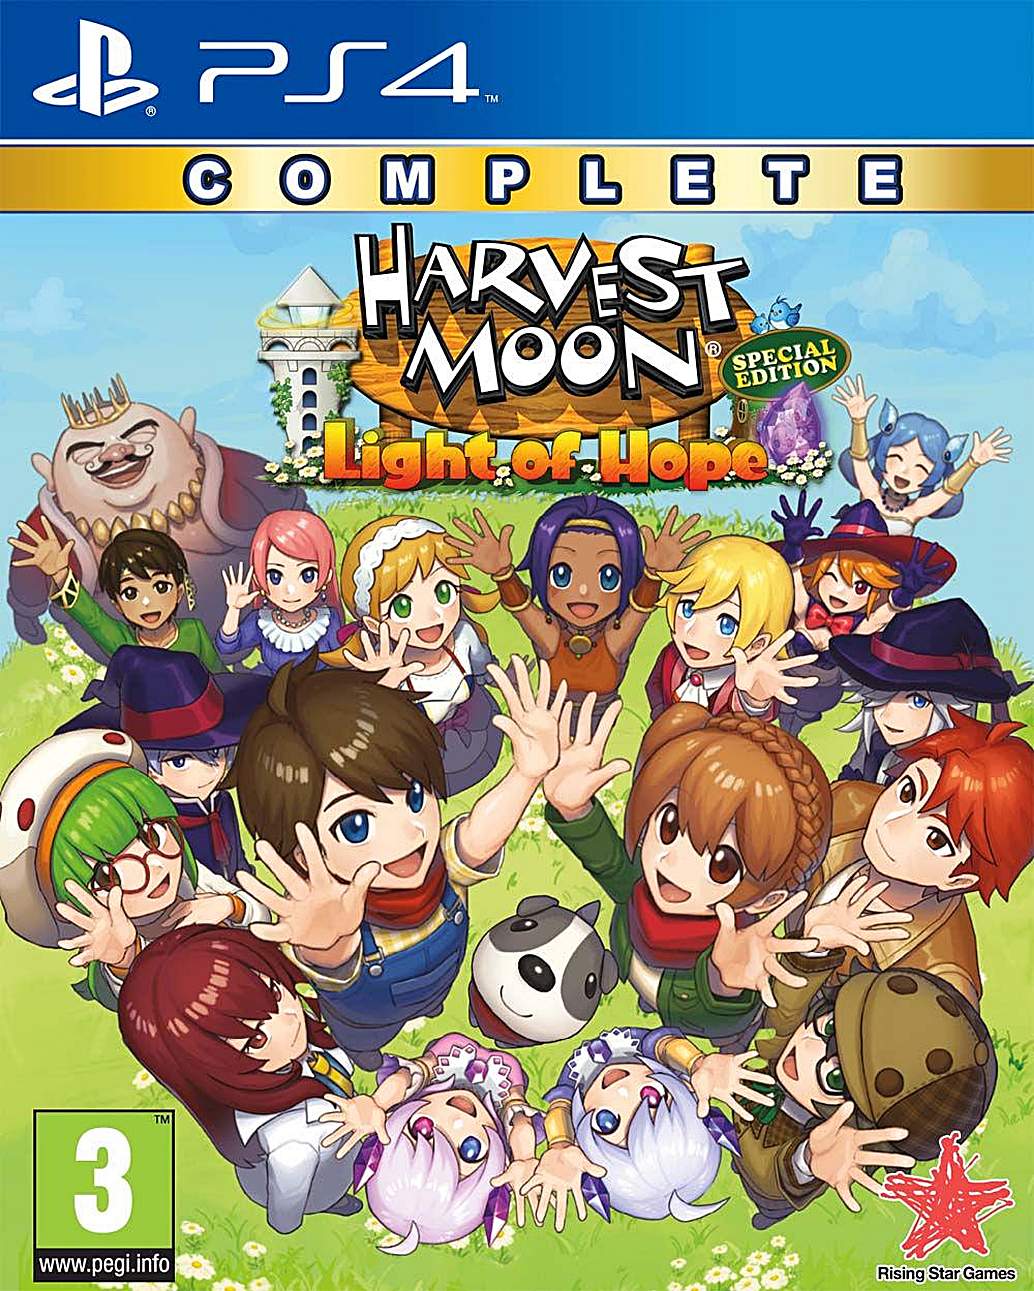 Harvest Moon - Light of Hope - Complete - Special Edition